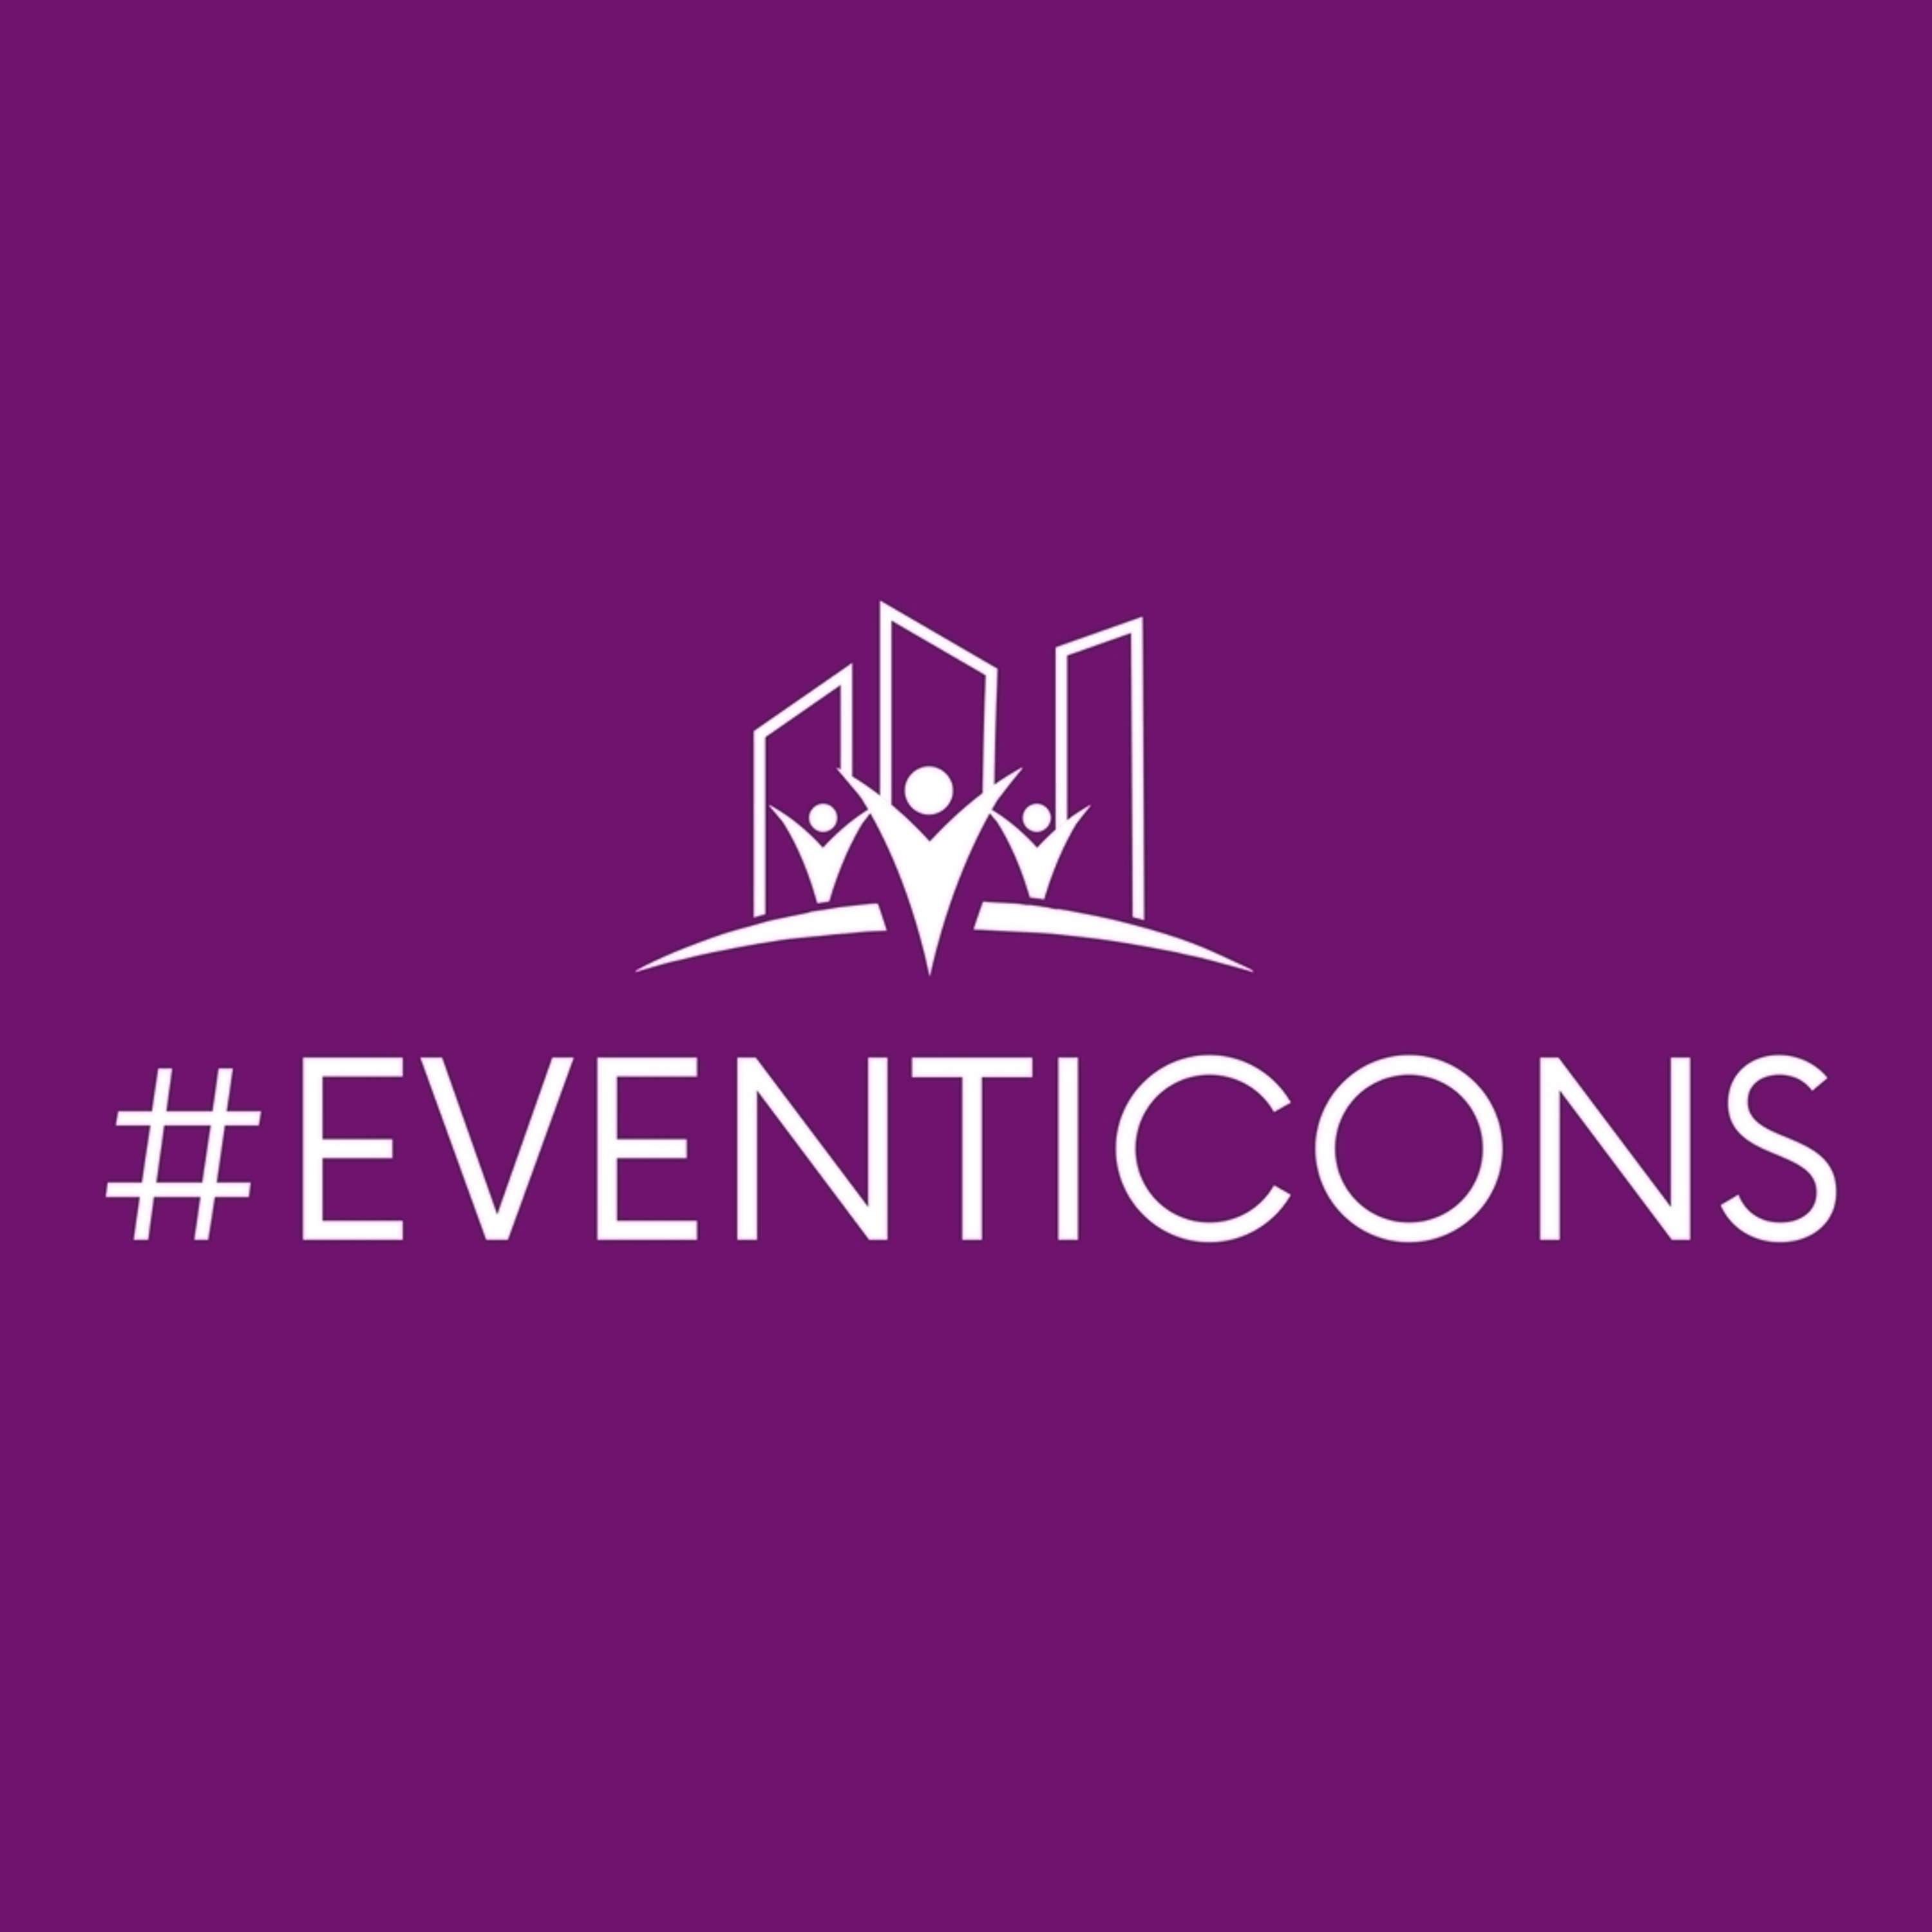 How Endless Events Does Marketing – #EventIcons Episode 171